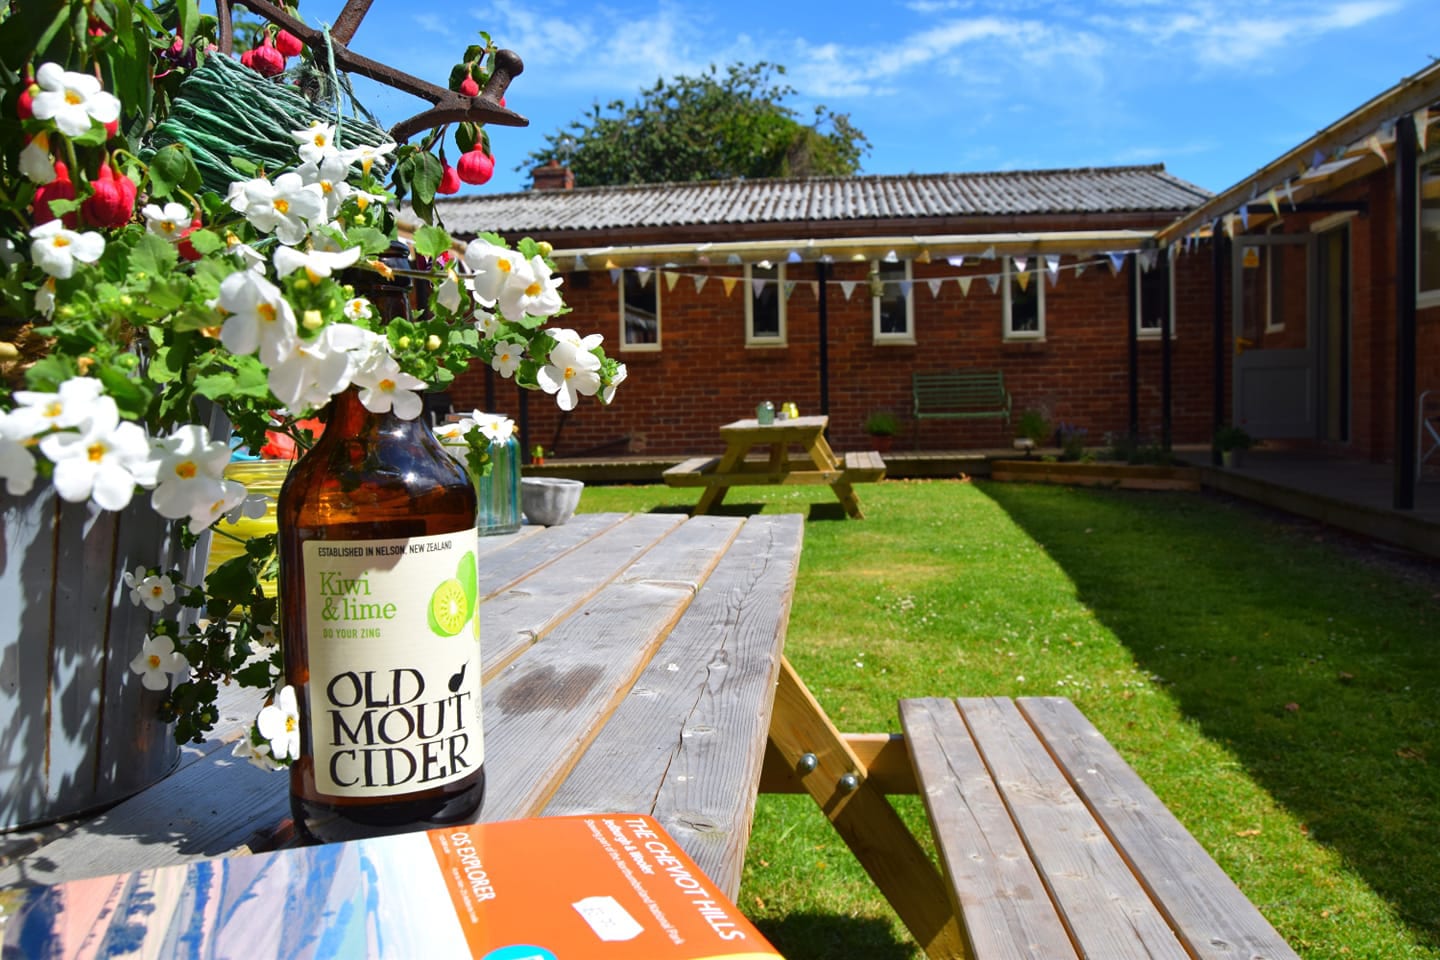 Cider on a bench in the sun